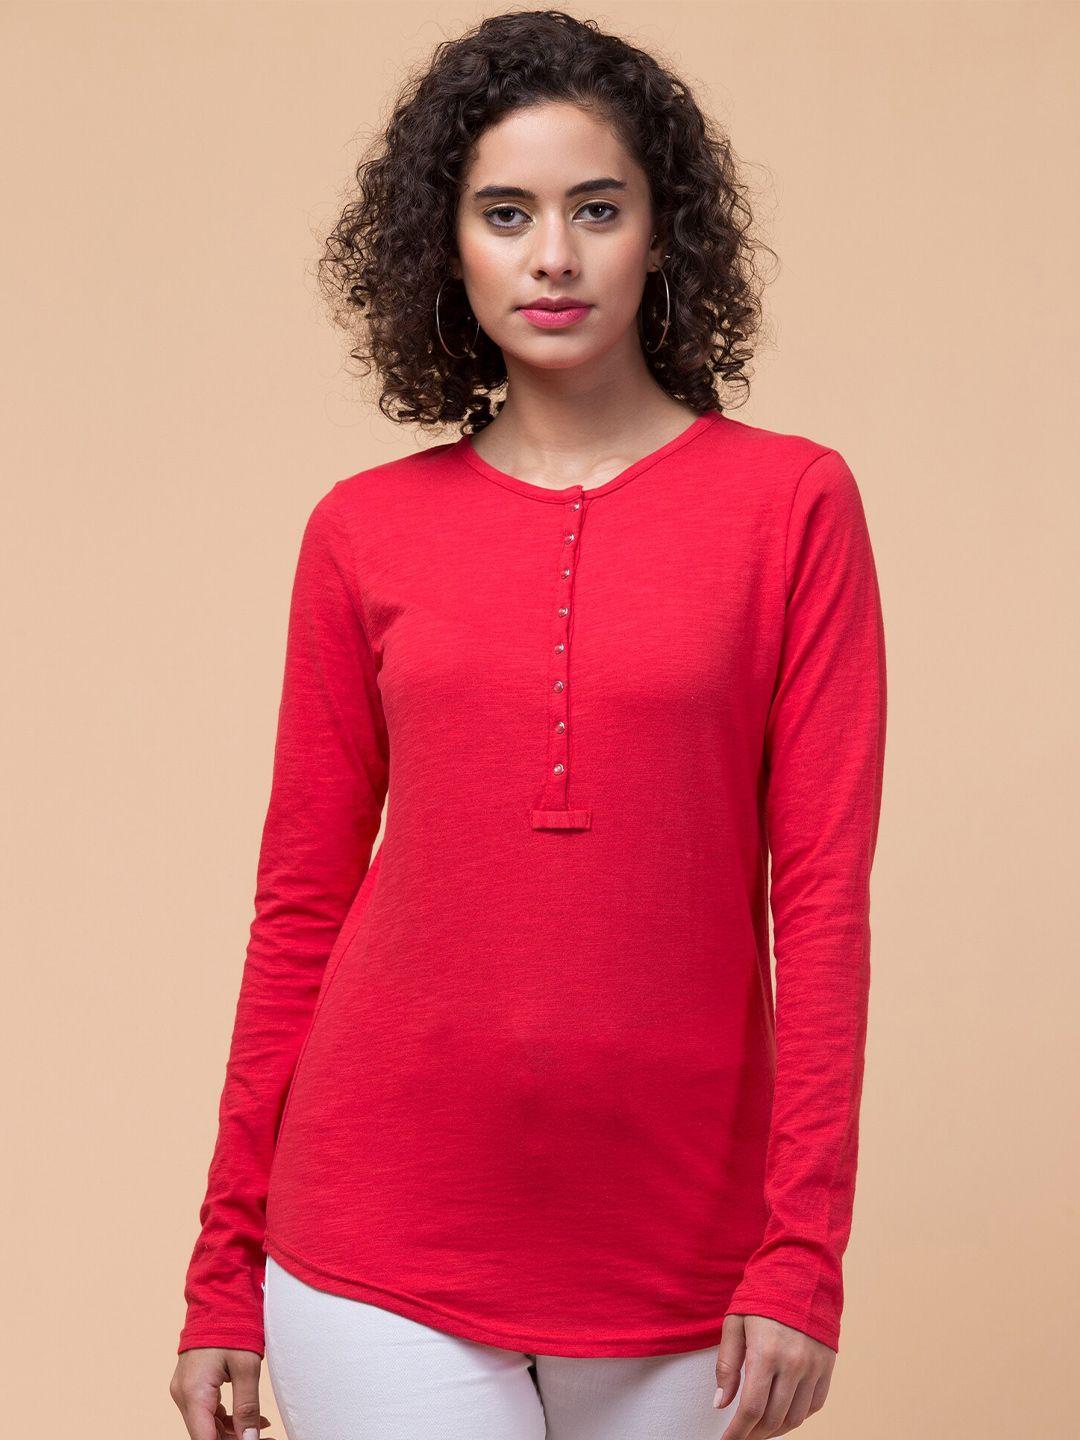 hive91-relaxed-fit-round-neck-long-sleeve-cotton-t-shirt